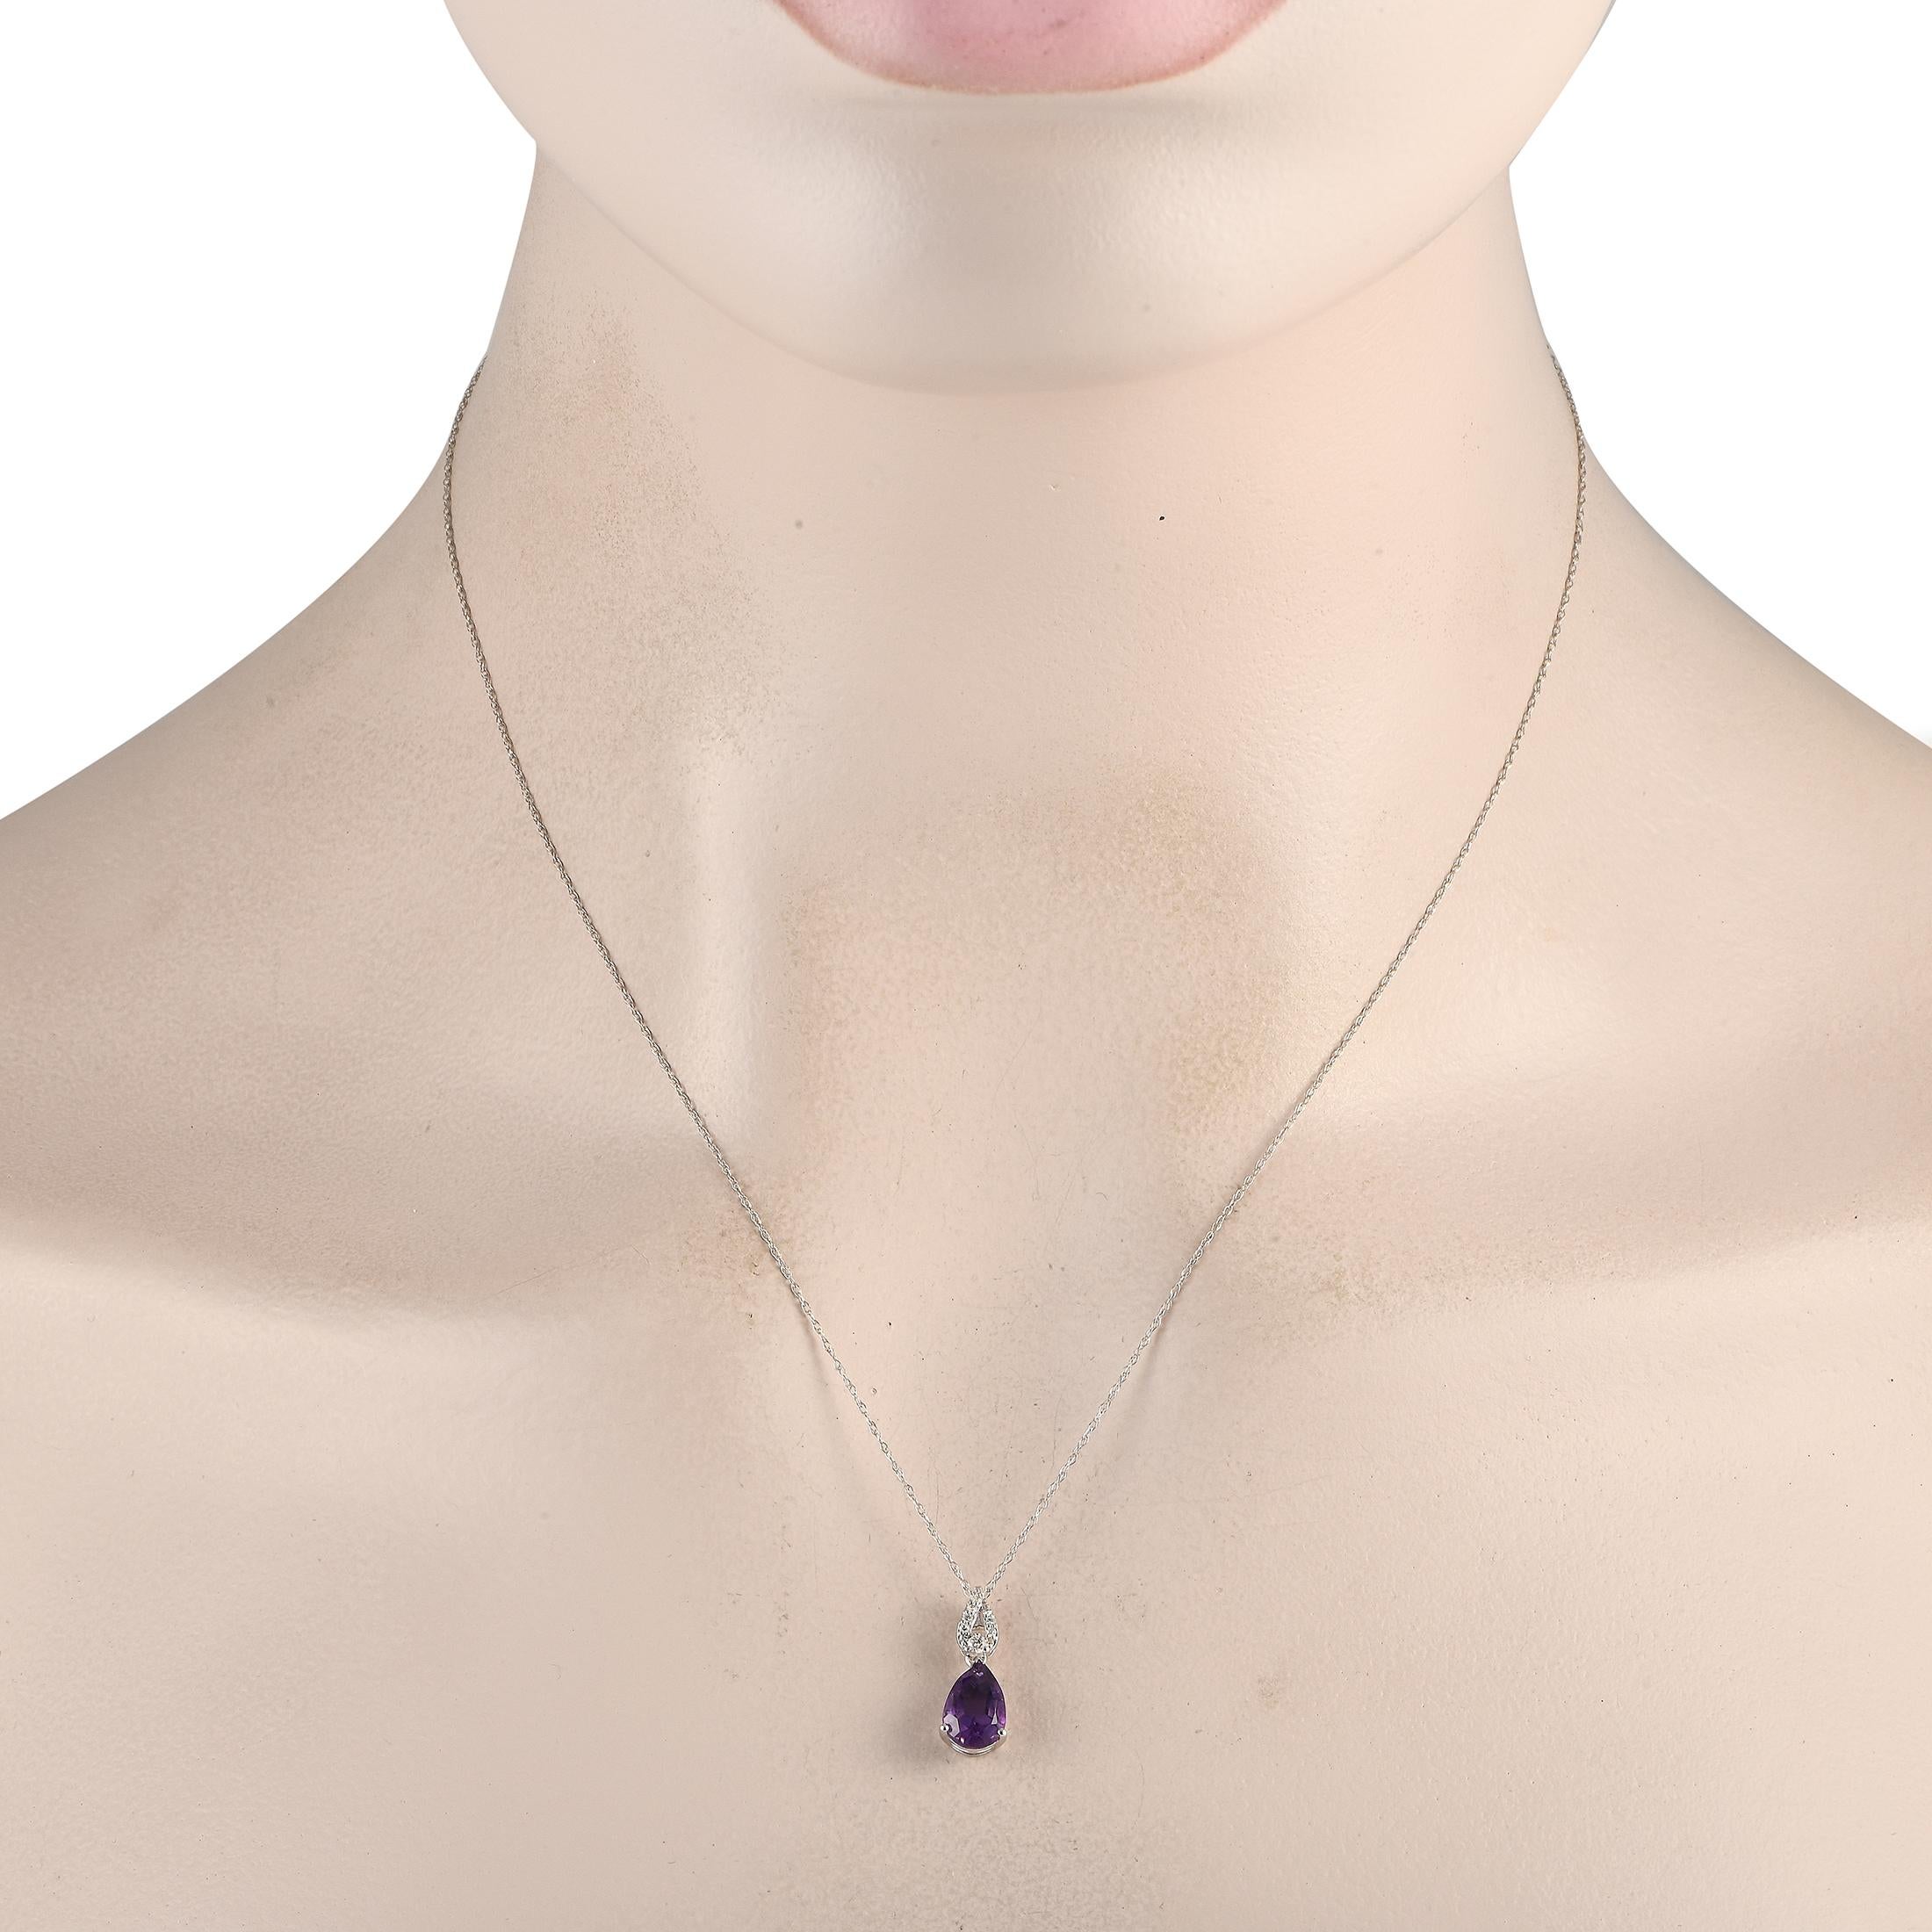 There's something about the barely there beauty of this piece. The thin necklace chain is fashioned from 14K white gold, holding a diamond-studded swirled link as its bail. Dropping from the glittering connector is a faceted pear-shaped amethyst on